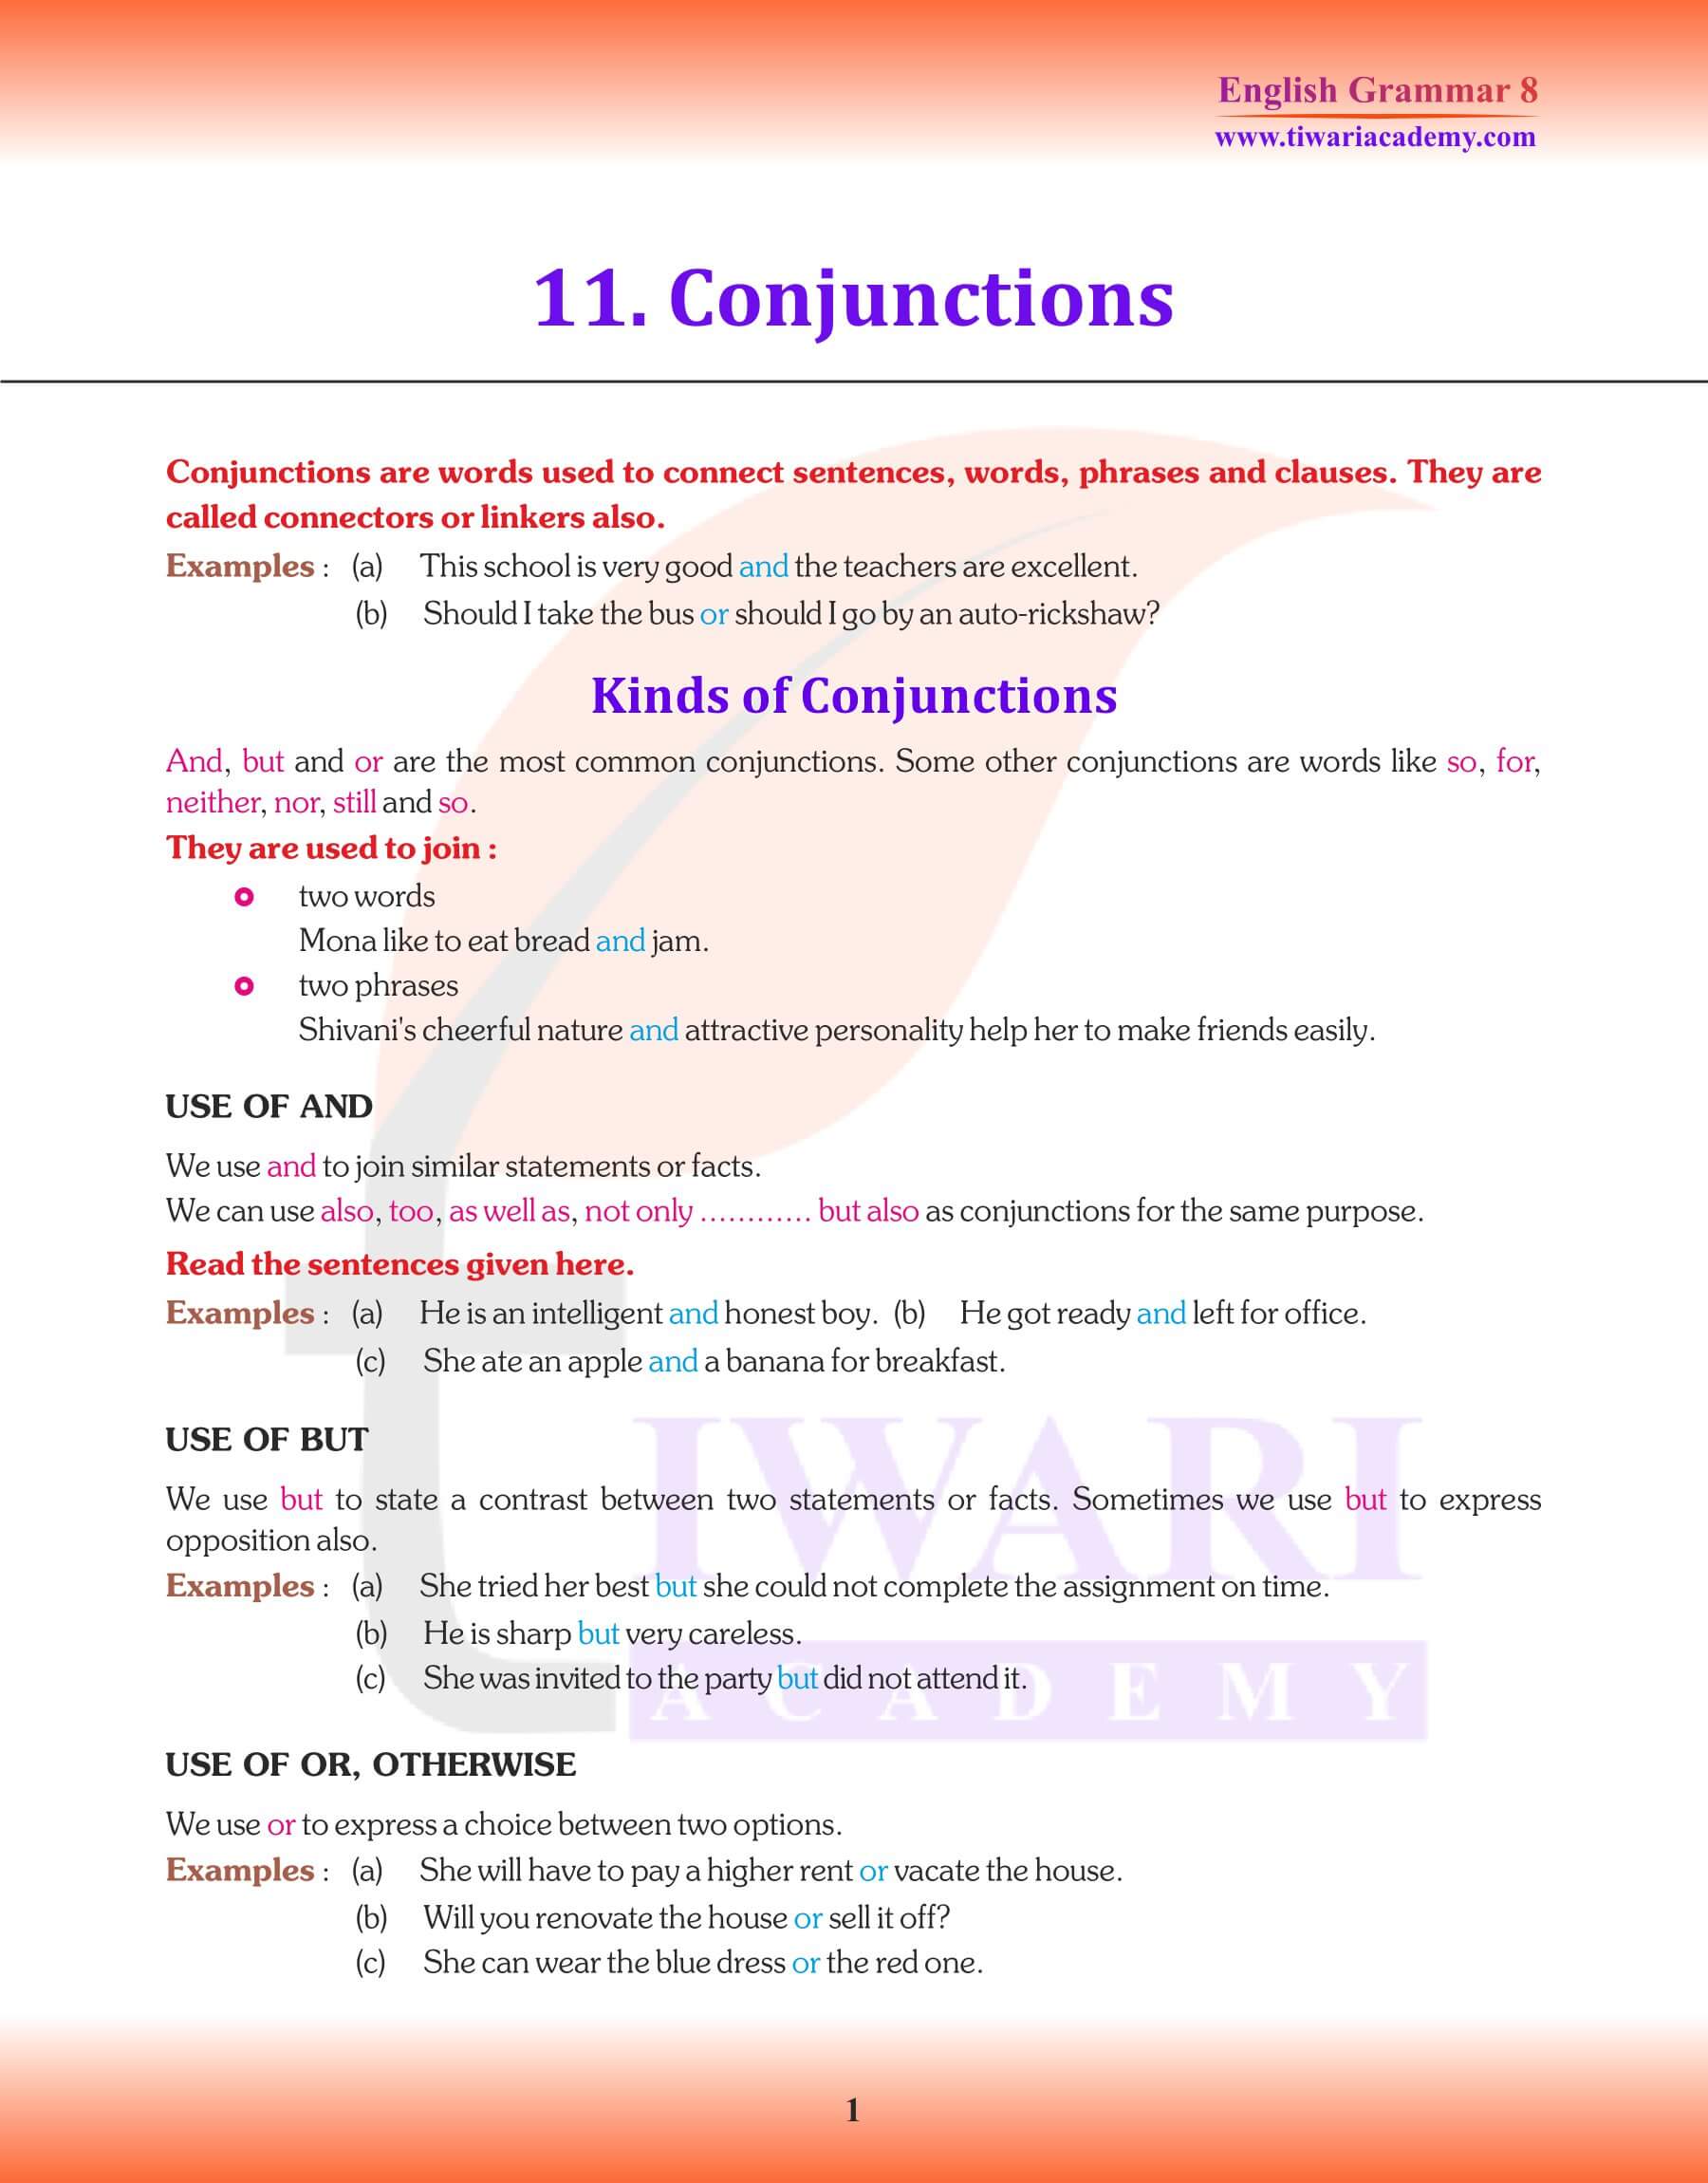 Class 8 English Grammar Conjunctions Revision book